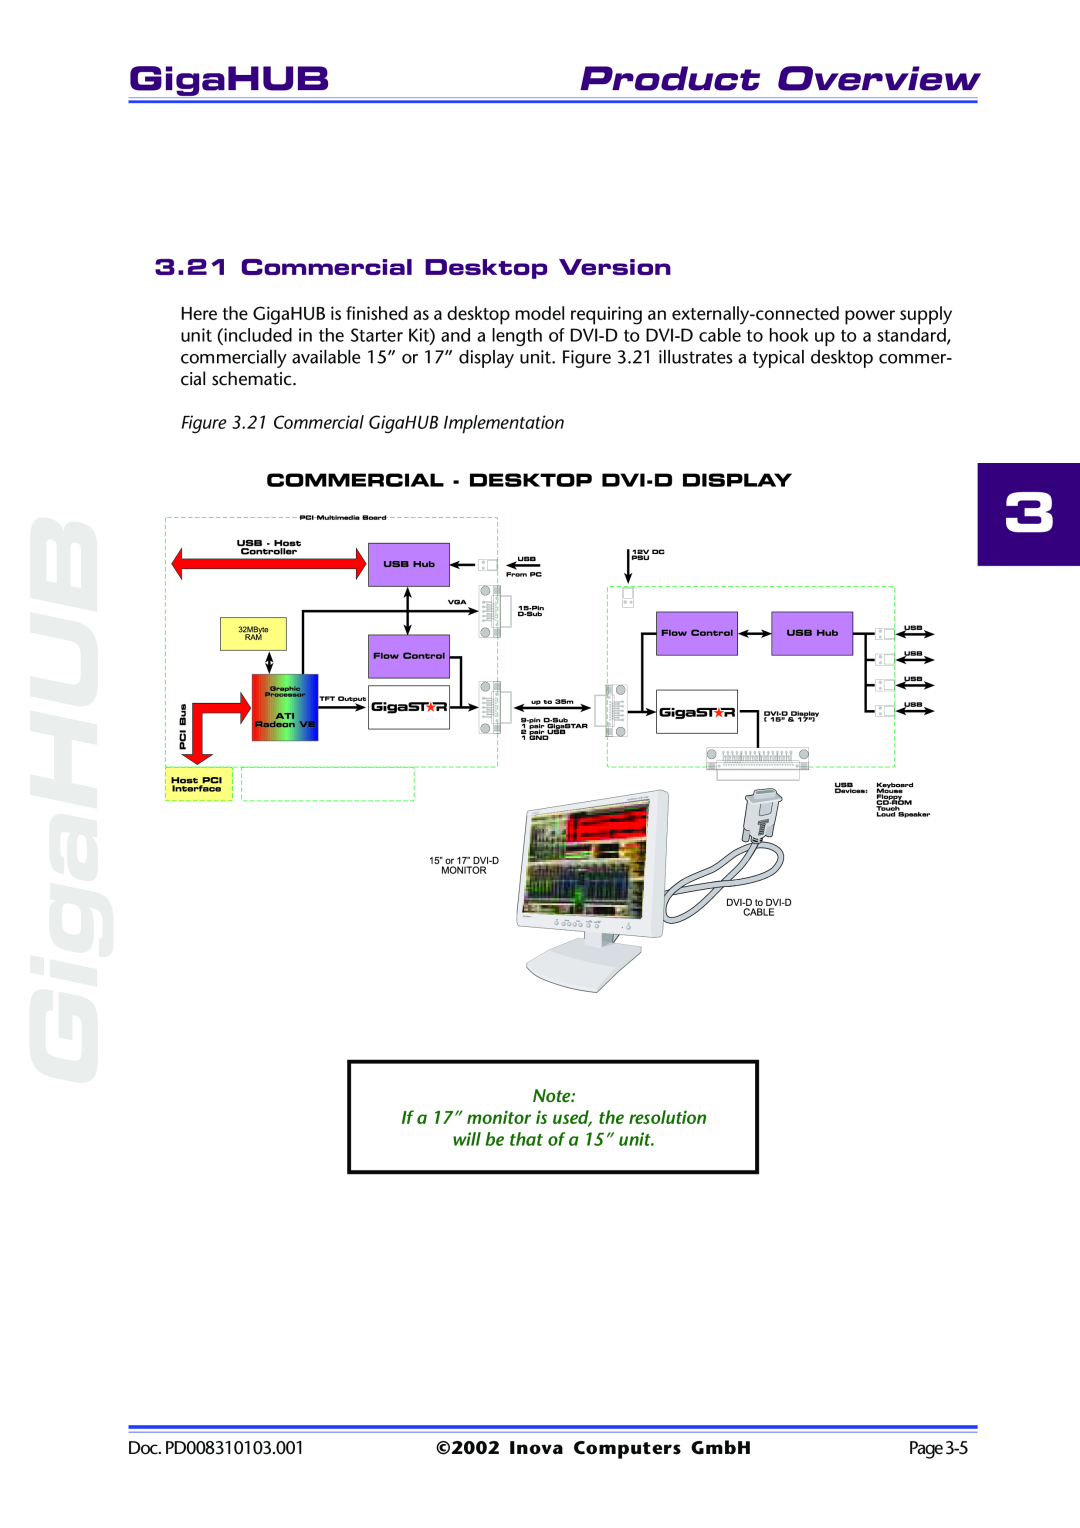 Inova PD008310103.001 AB user manual Product Overview, Commercial Desktop Version, 21 Commercial GigaHUB Implementation 